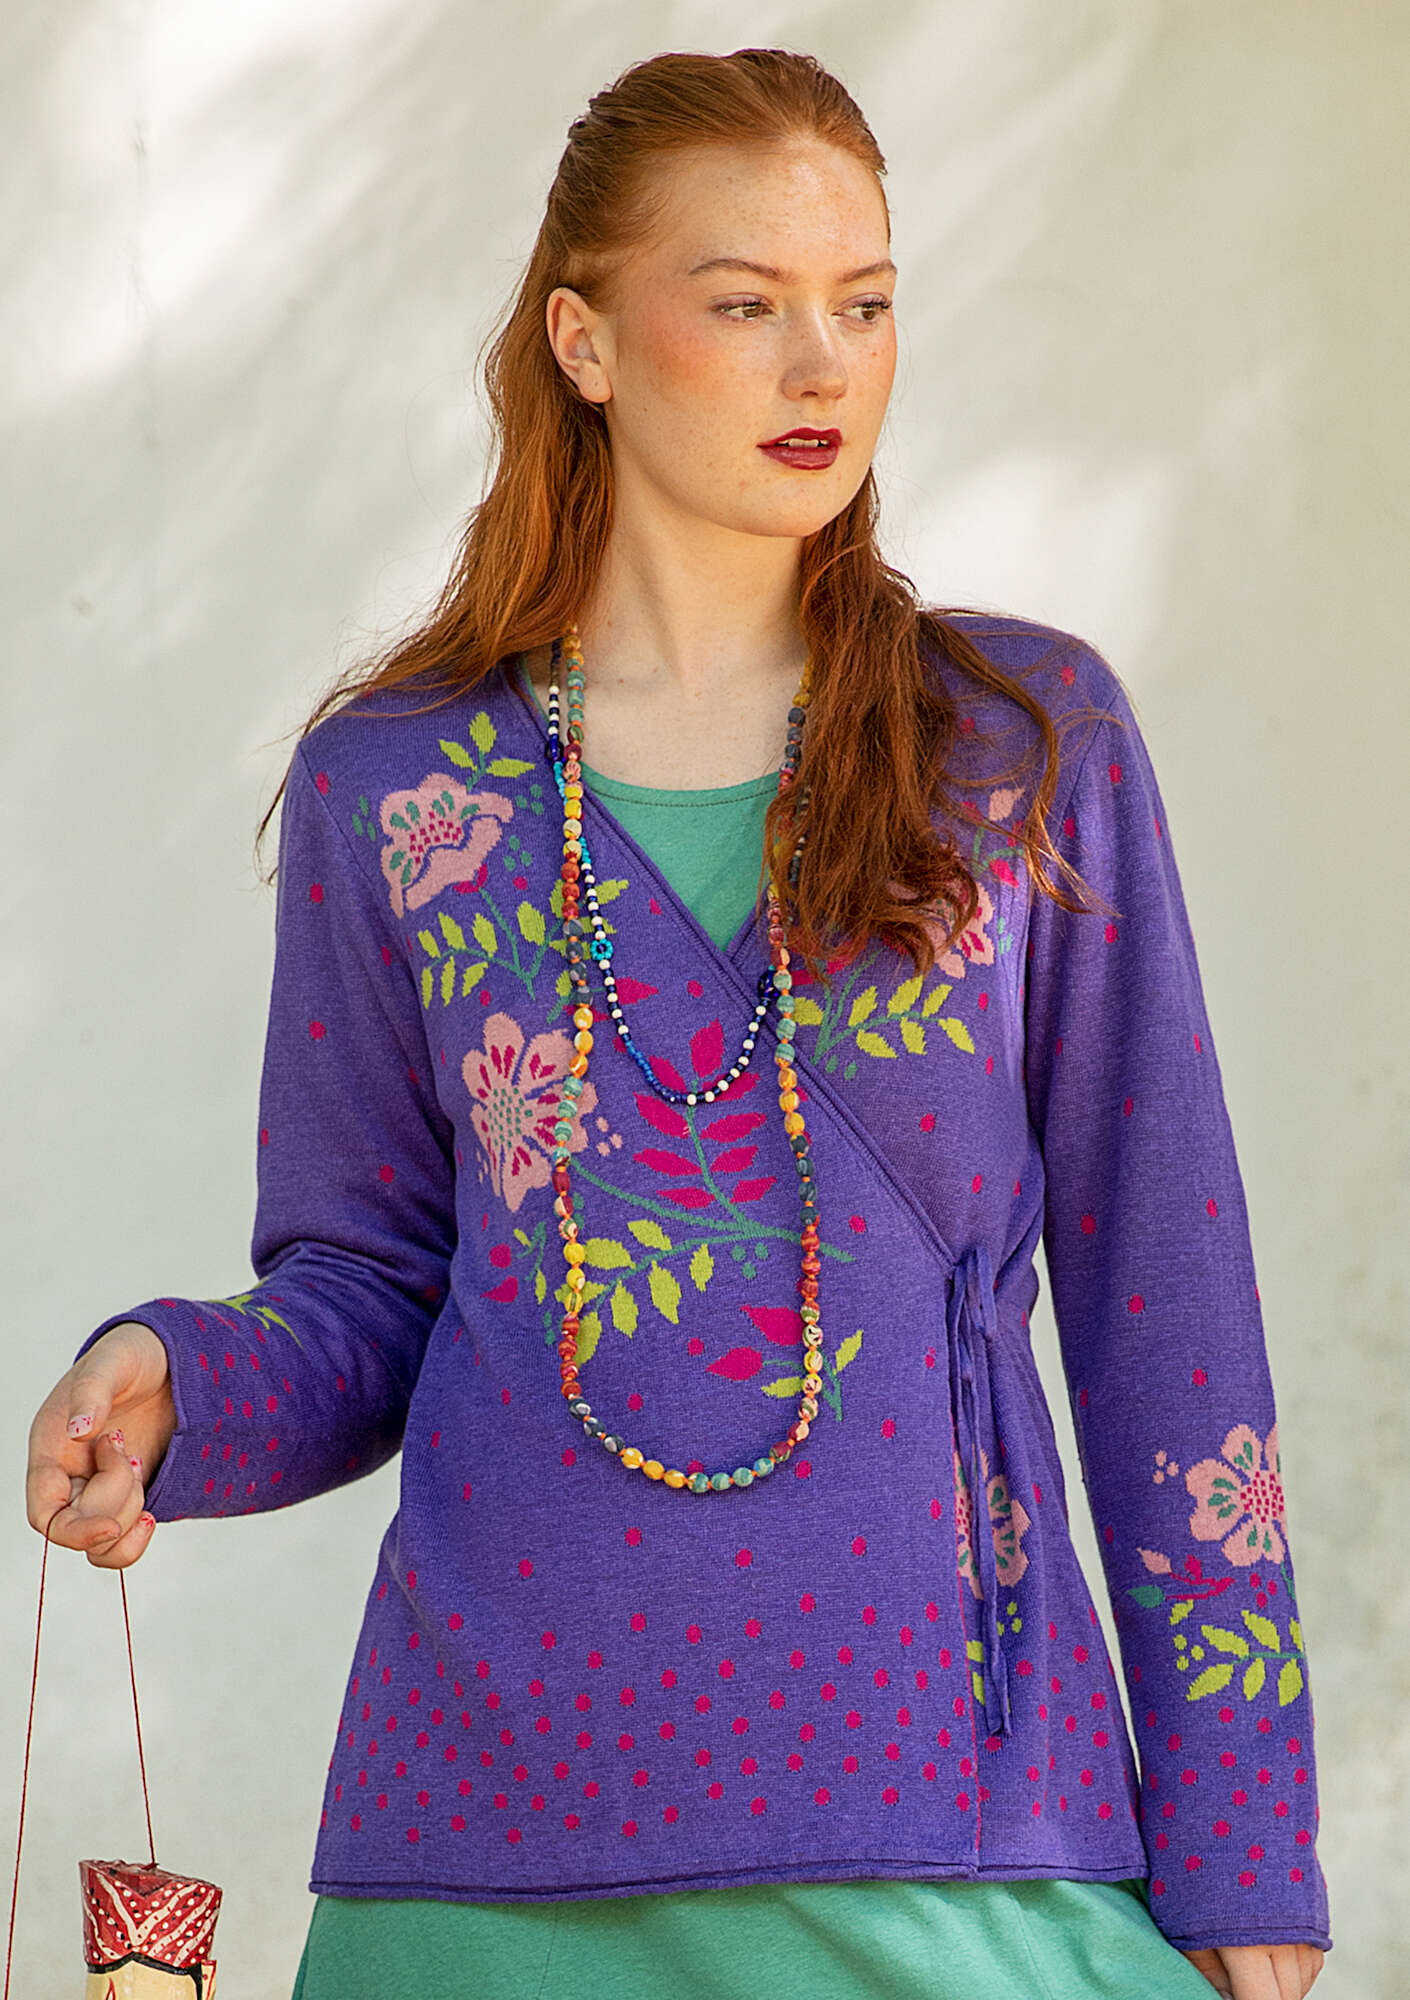 “Primavera” cardigan in linen/organic and recycled cotton amethyst